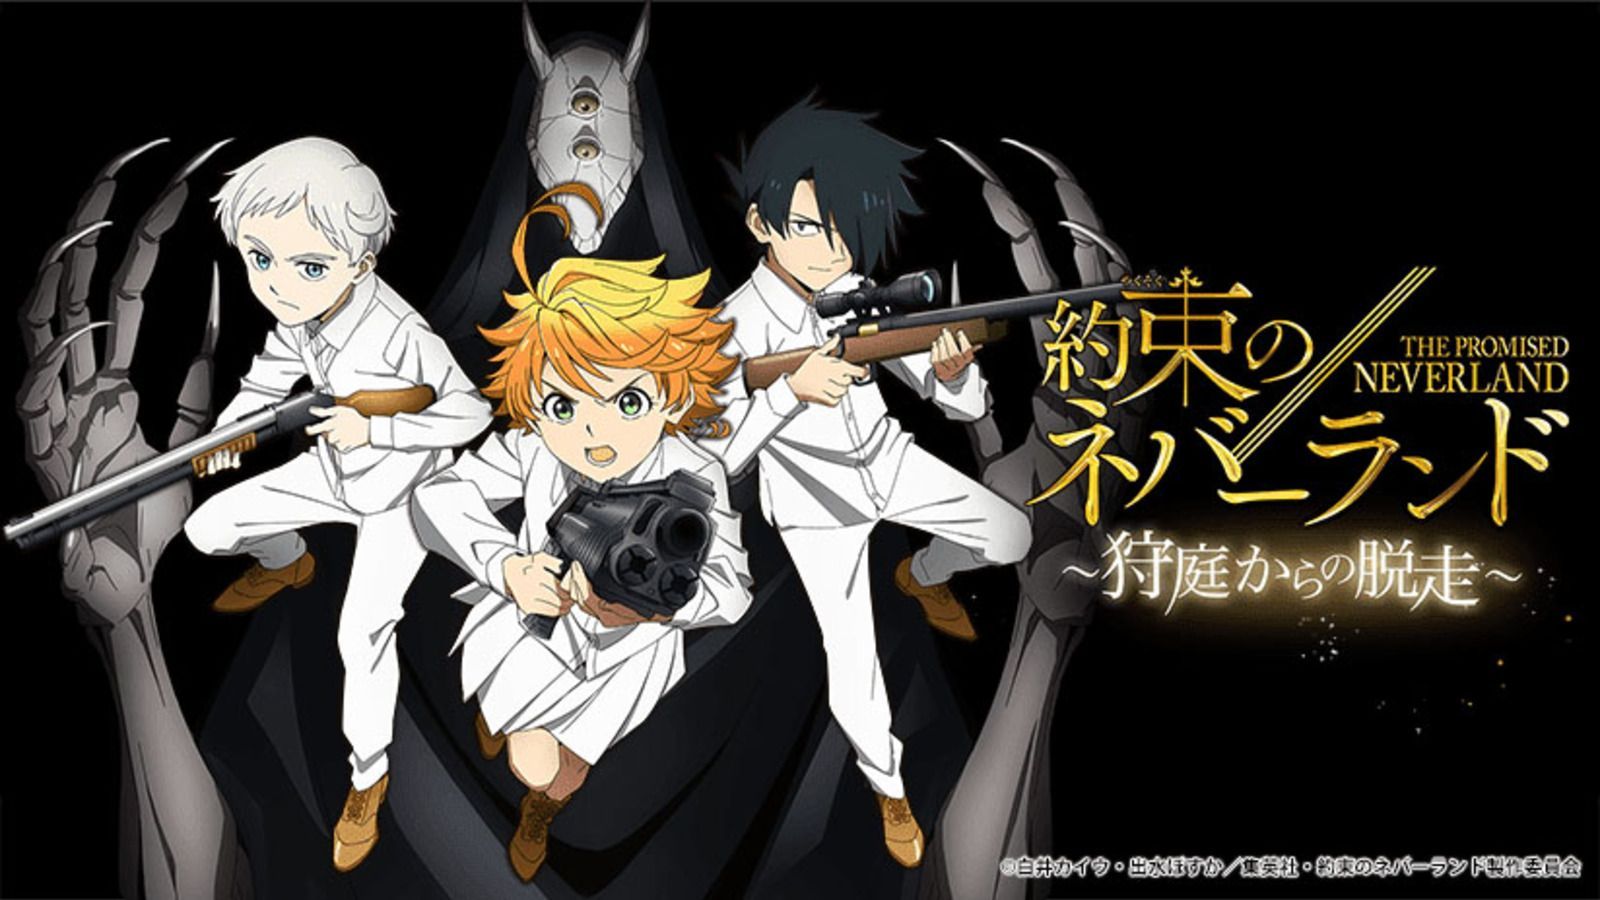 The Promised Neverland Episode 11 - Zwischenzug - I drink and watch anime